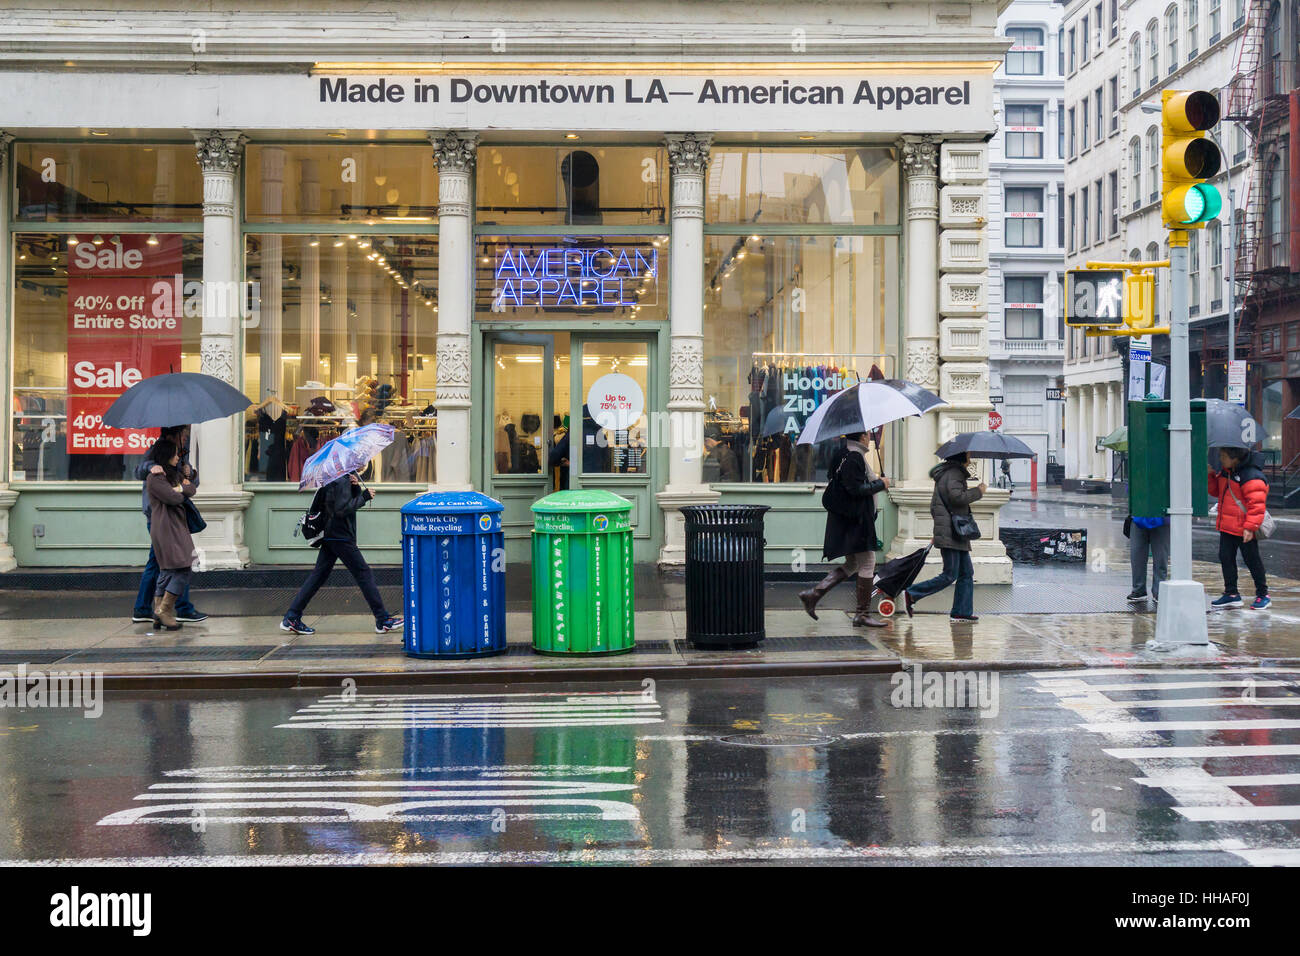 An American Apparel store in Soho in New York on Tuesday, January 17, 2017.  Canadian sportswear company Gildan Activewear has purchased the American  Apparel brand and some manufacturing equipment for $88 million